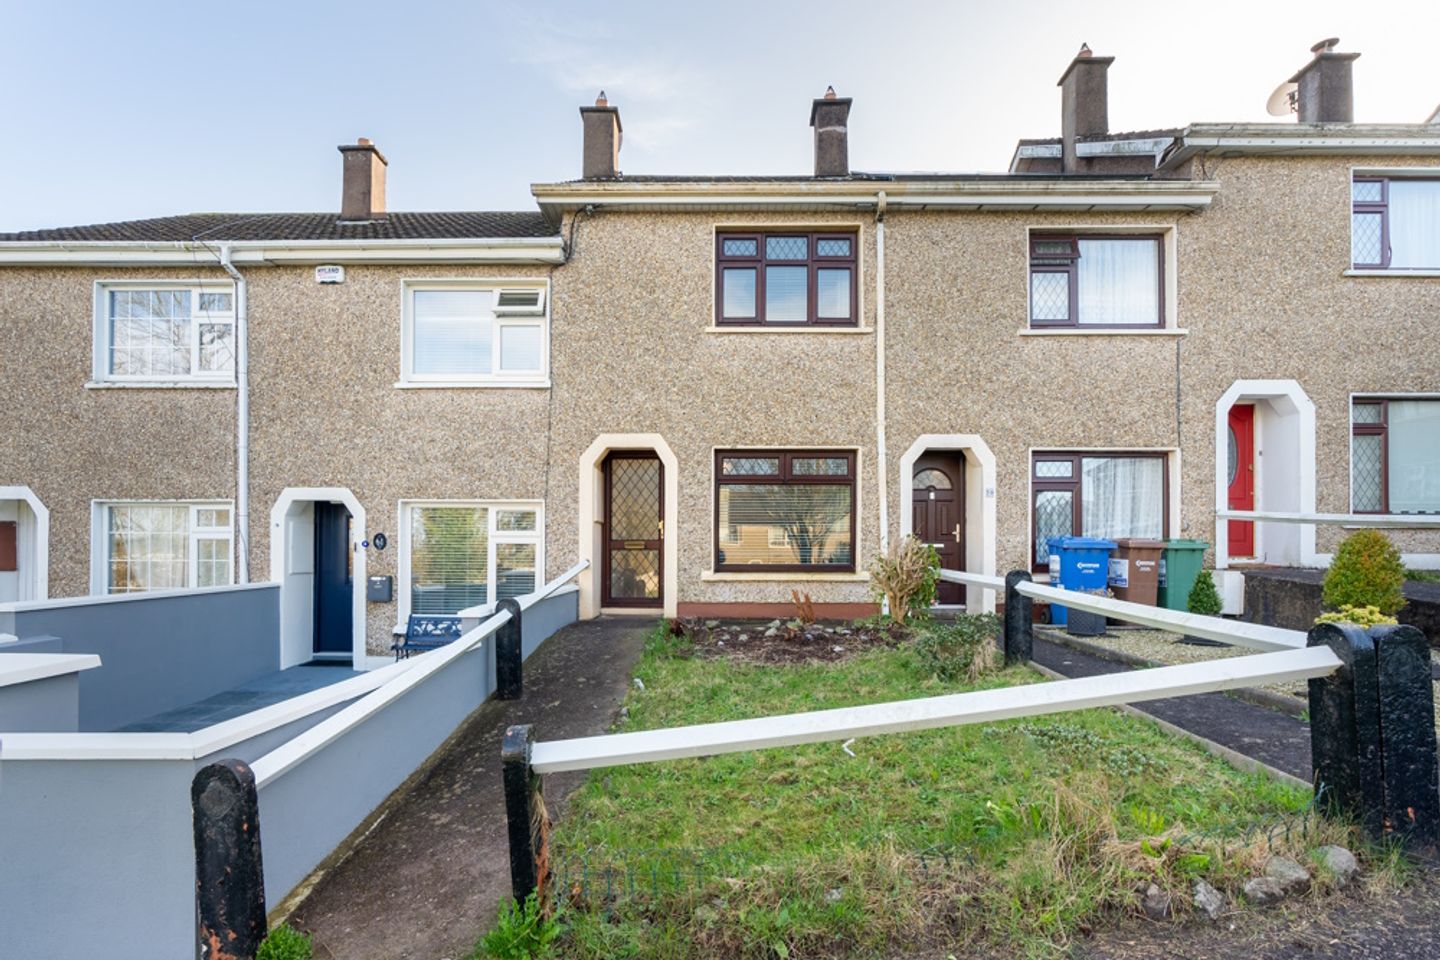 60 Palmbury, Togher, Co. Cork, T12YHP4